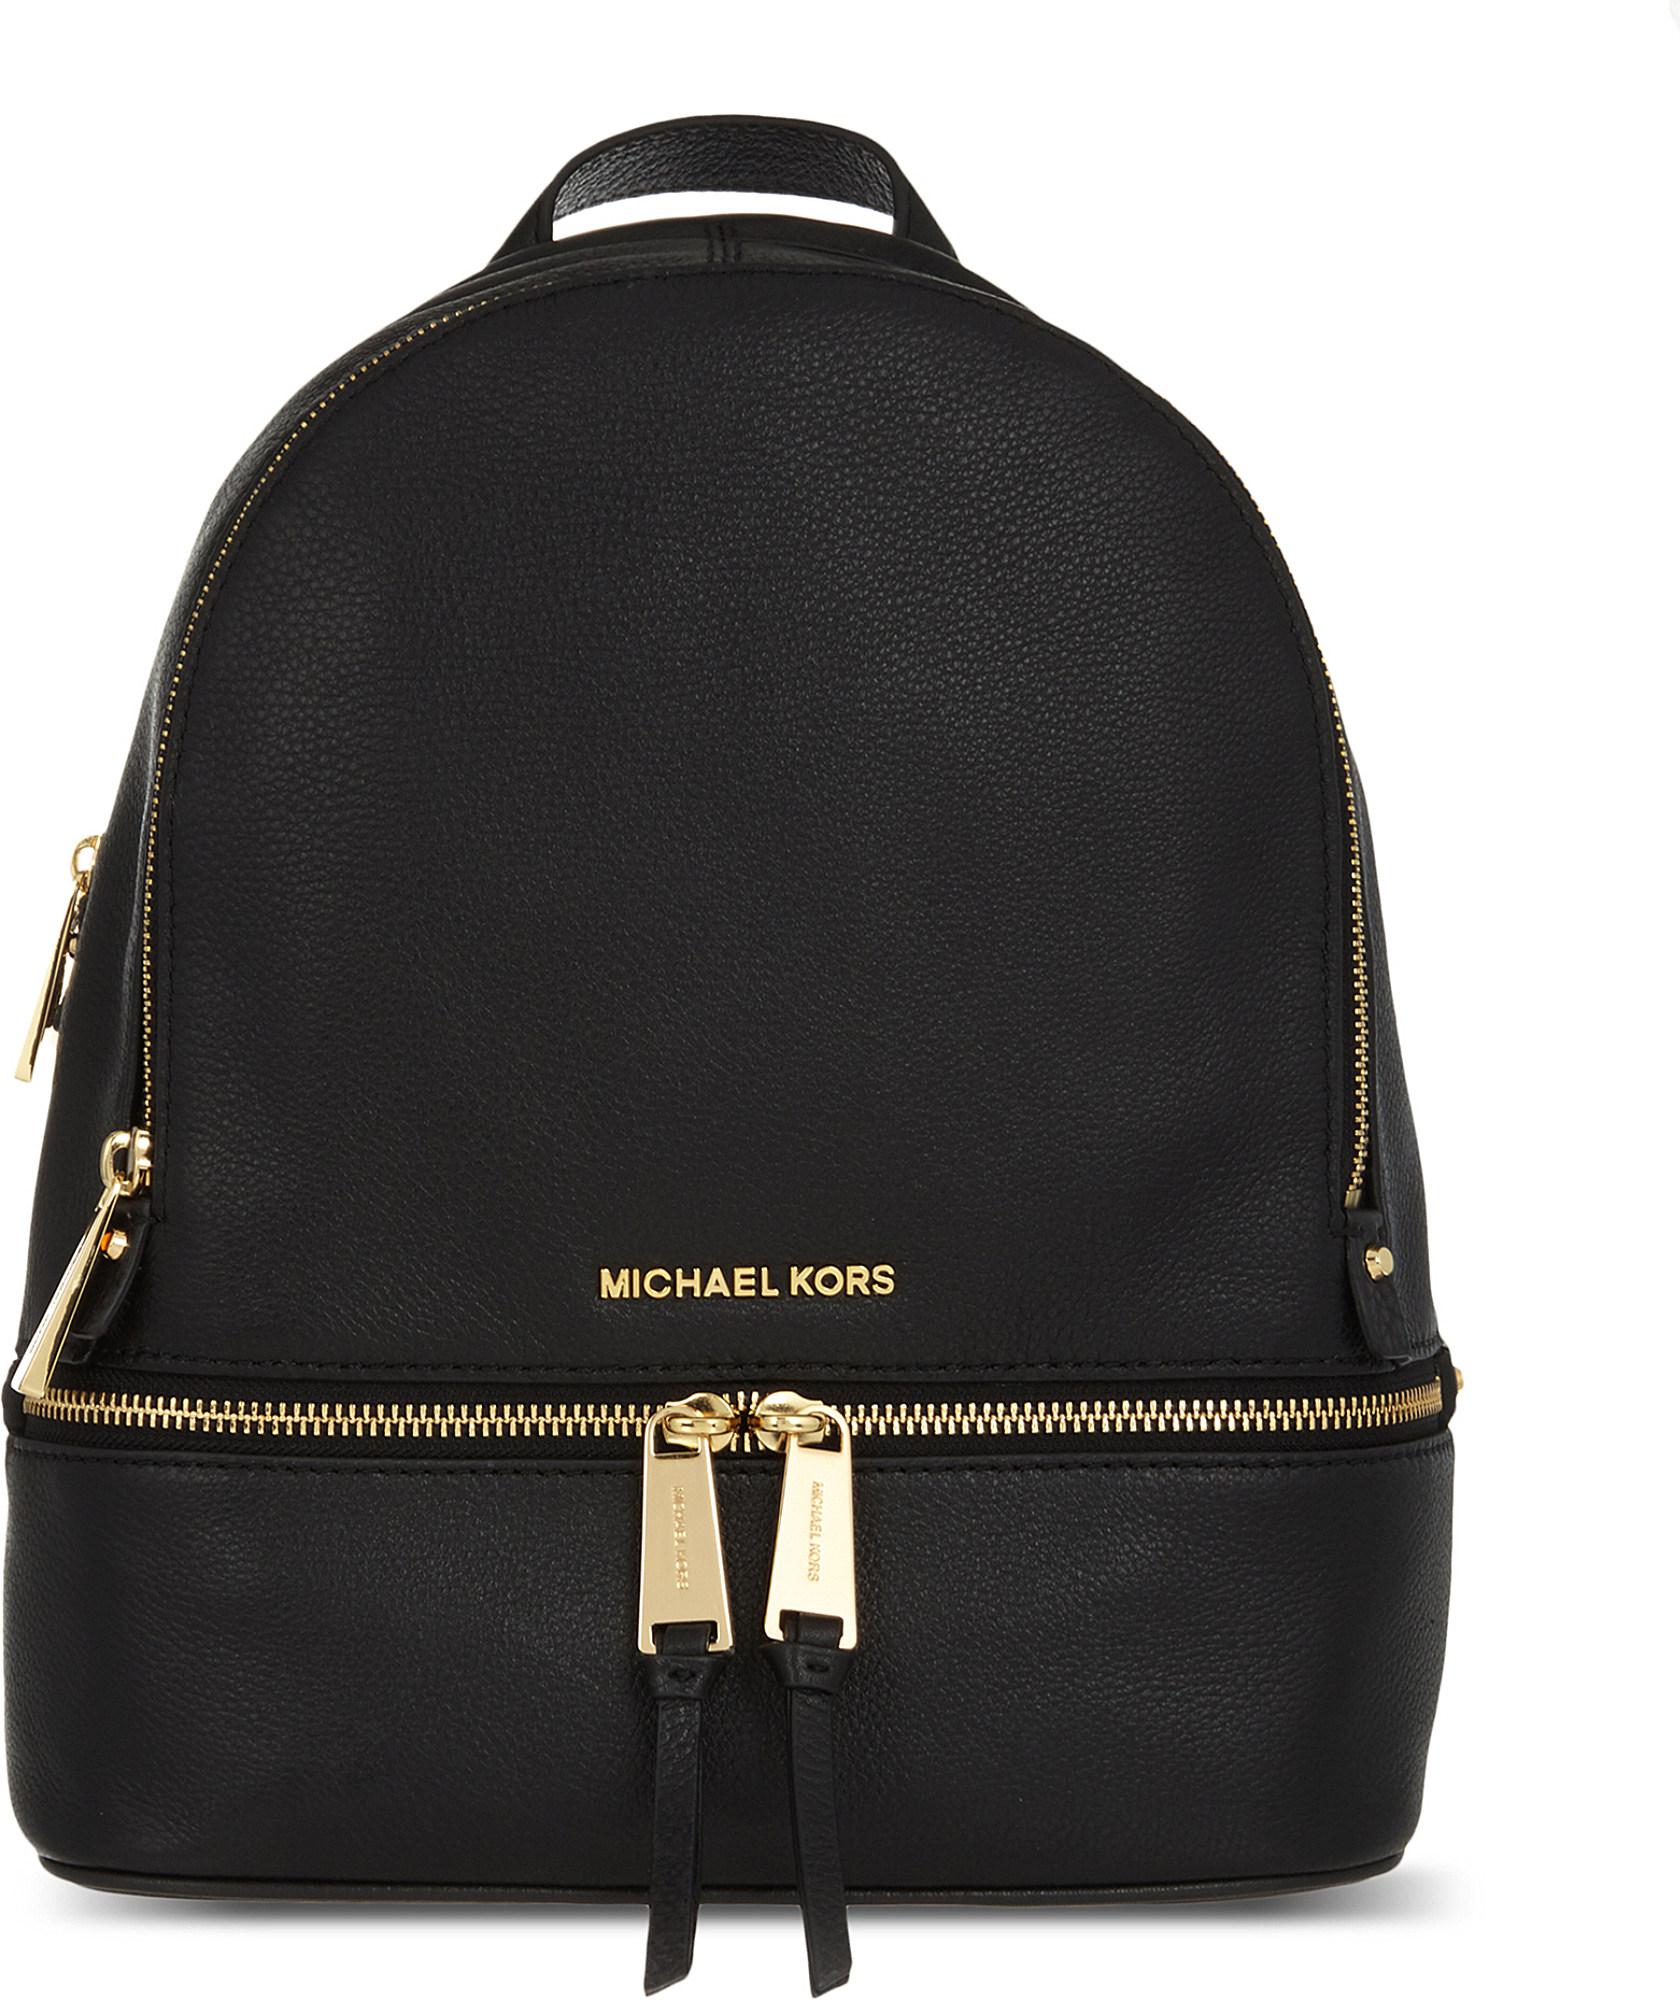 MICHAEL Michael Kors Rhea Small Leather Backpack in Black - Lyst